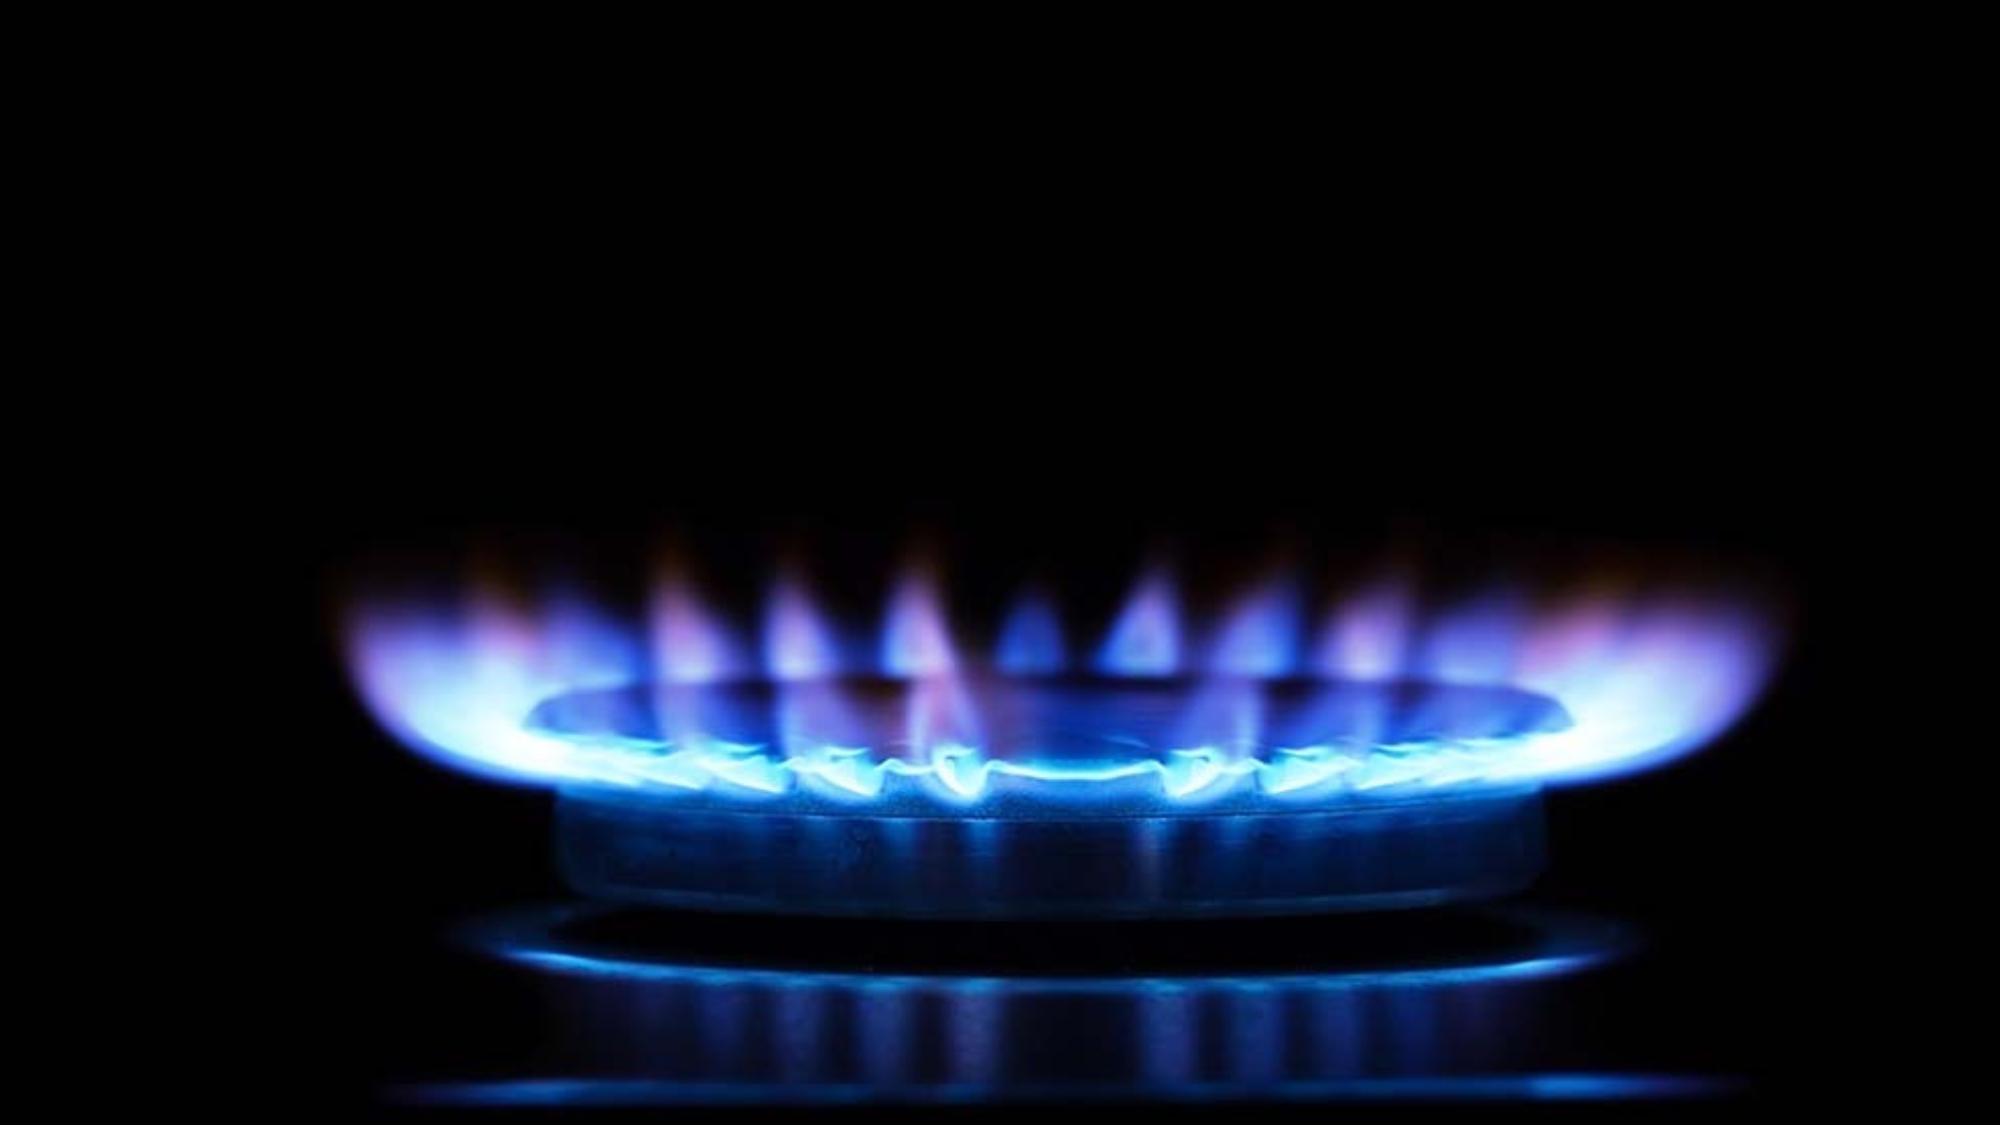 gas stove burner with blue fame and black background